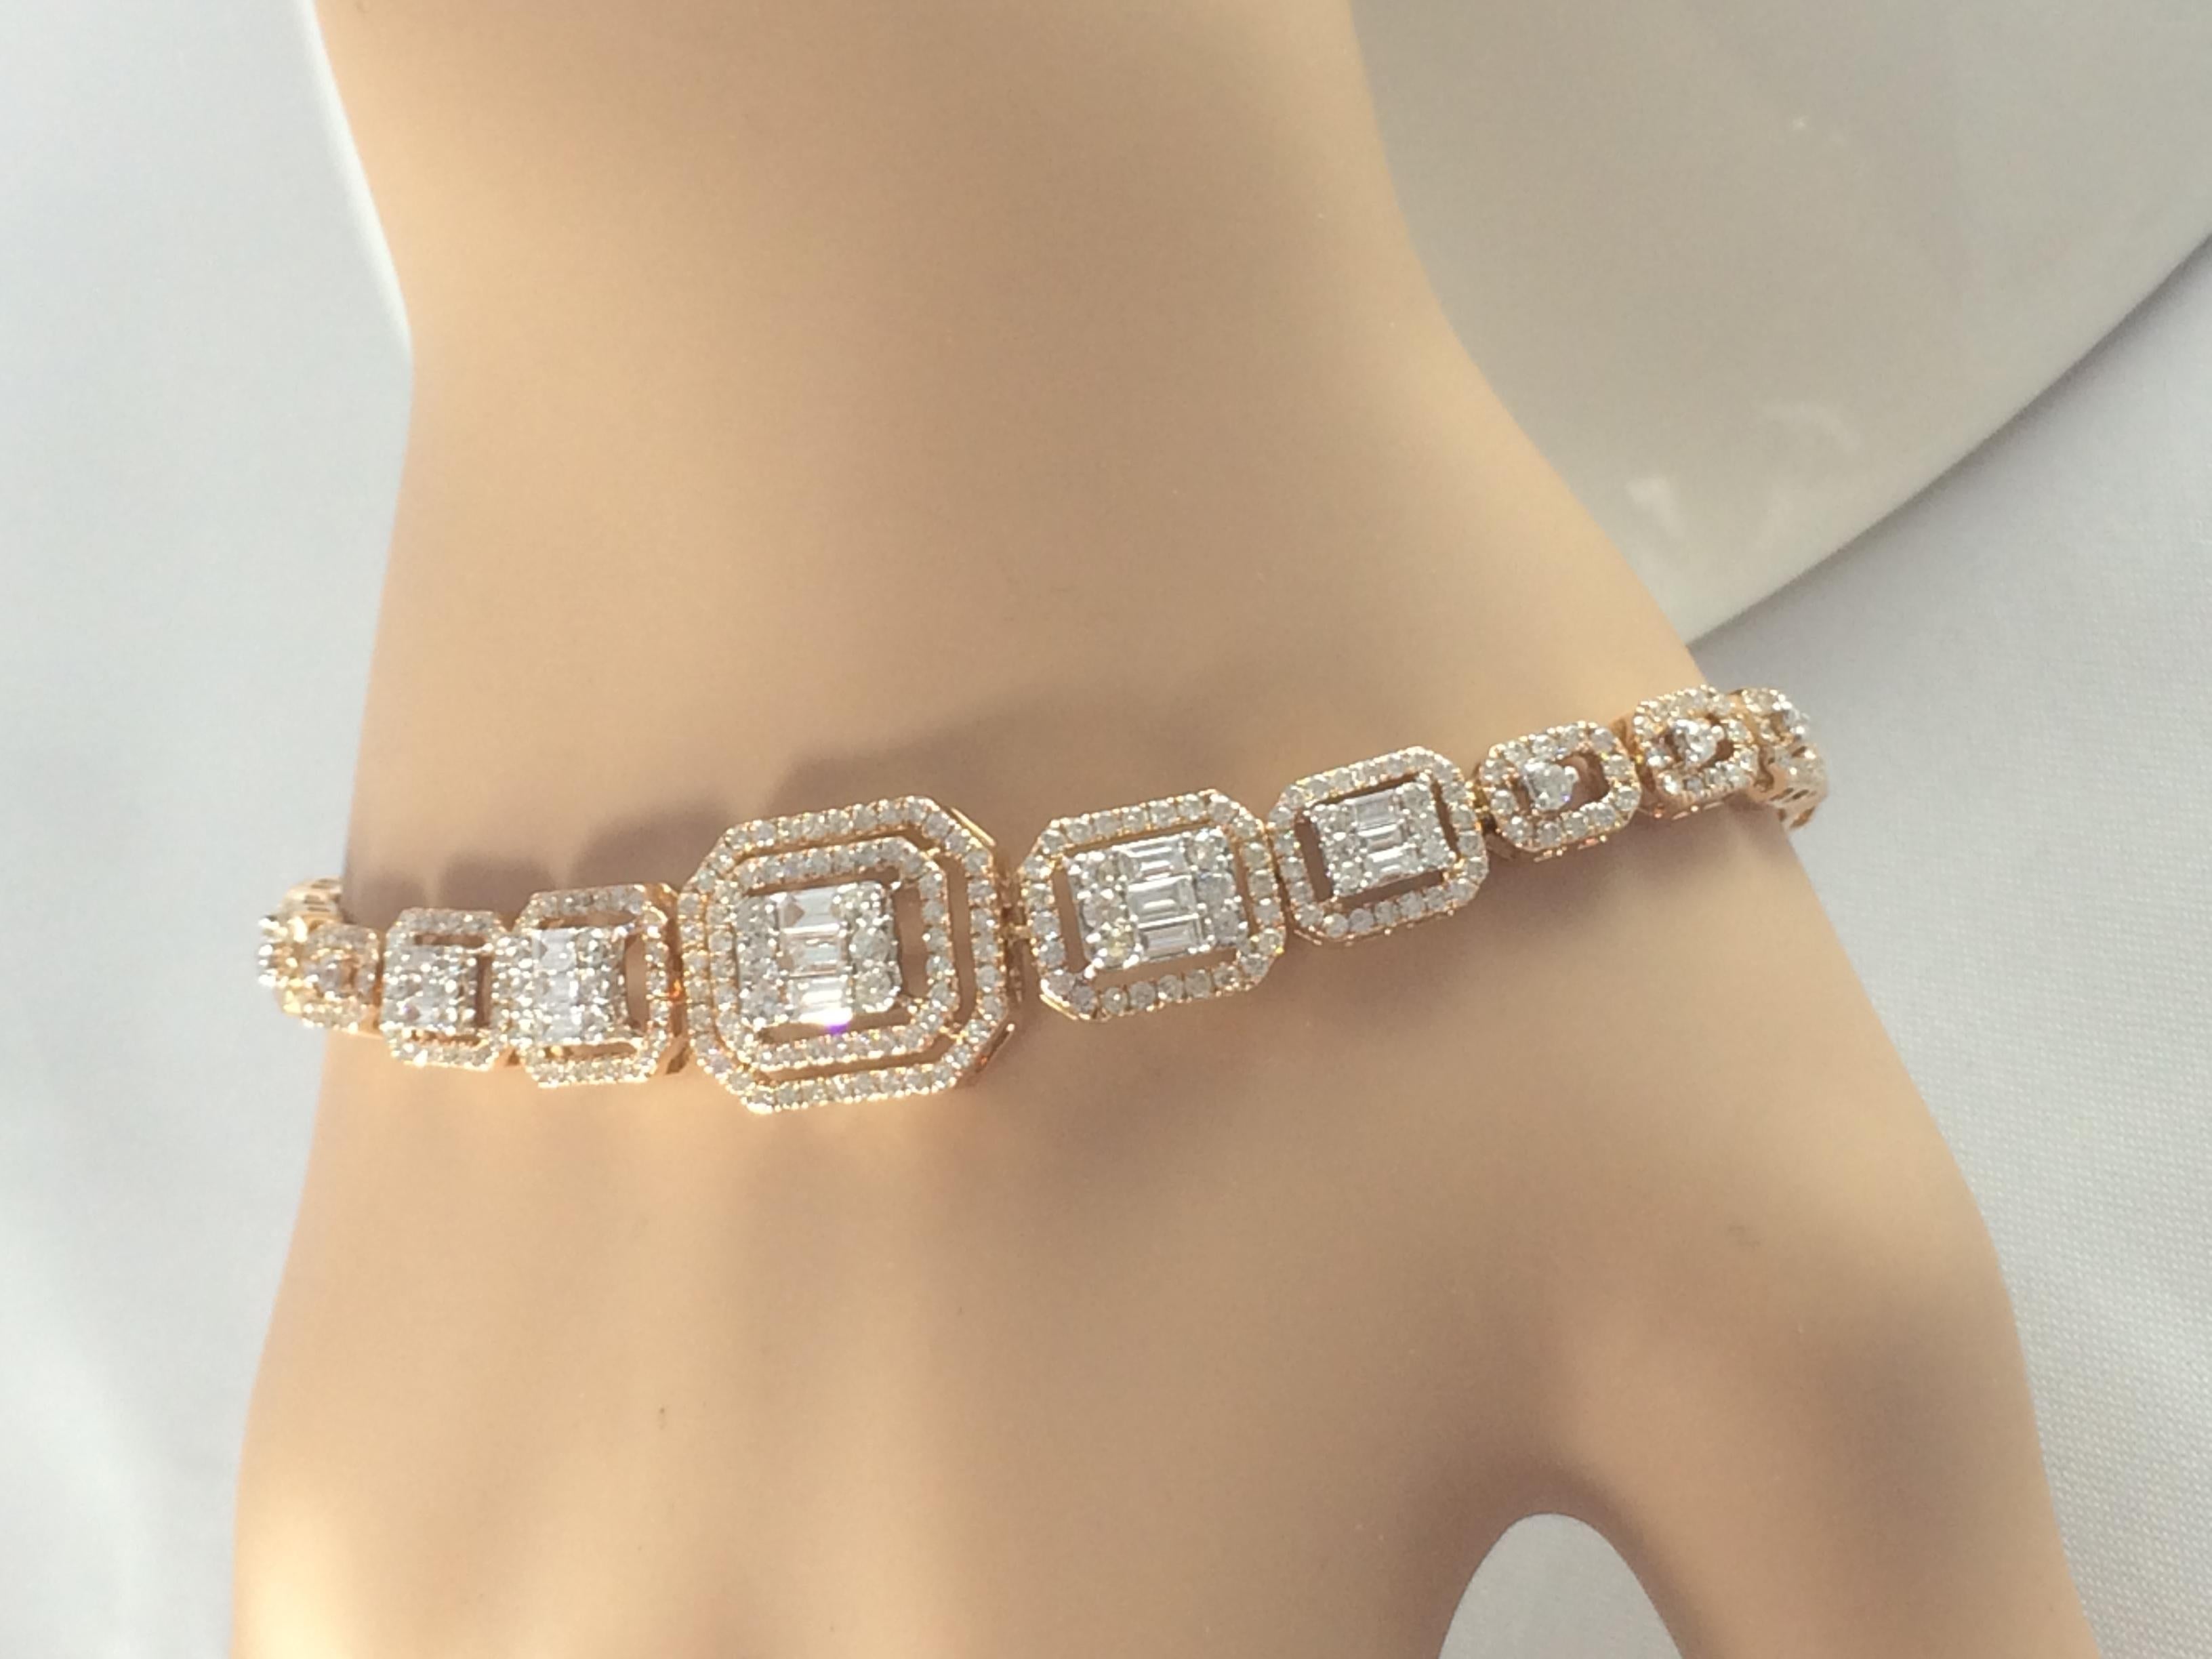 Gorgeous Diamond Cluster Bracelet in Rose Gold

This piece features 25 x Baguette Cut Diamonds that are high quality, graded Clarity VS2-SI and Colour G-I by an independent valued. They are really clean, white and sparkly. Surrounding the Baguettes